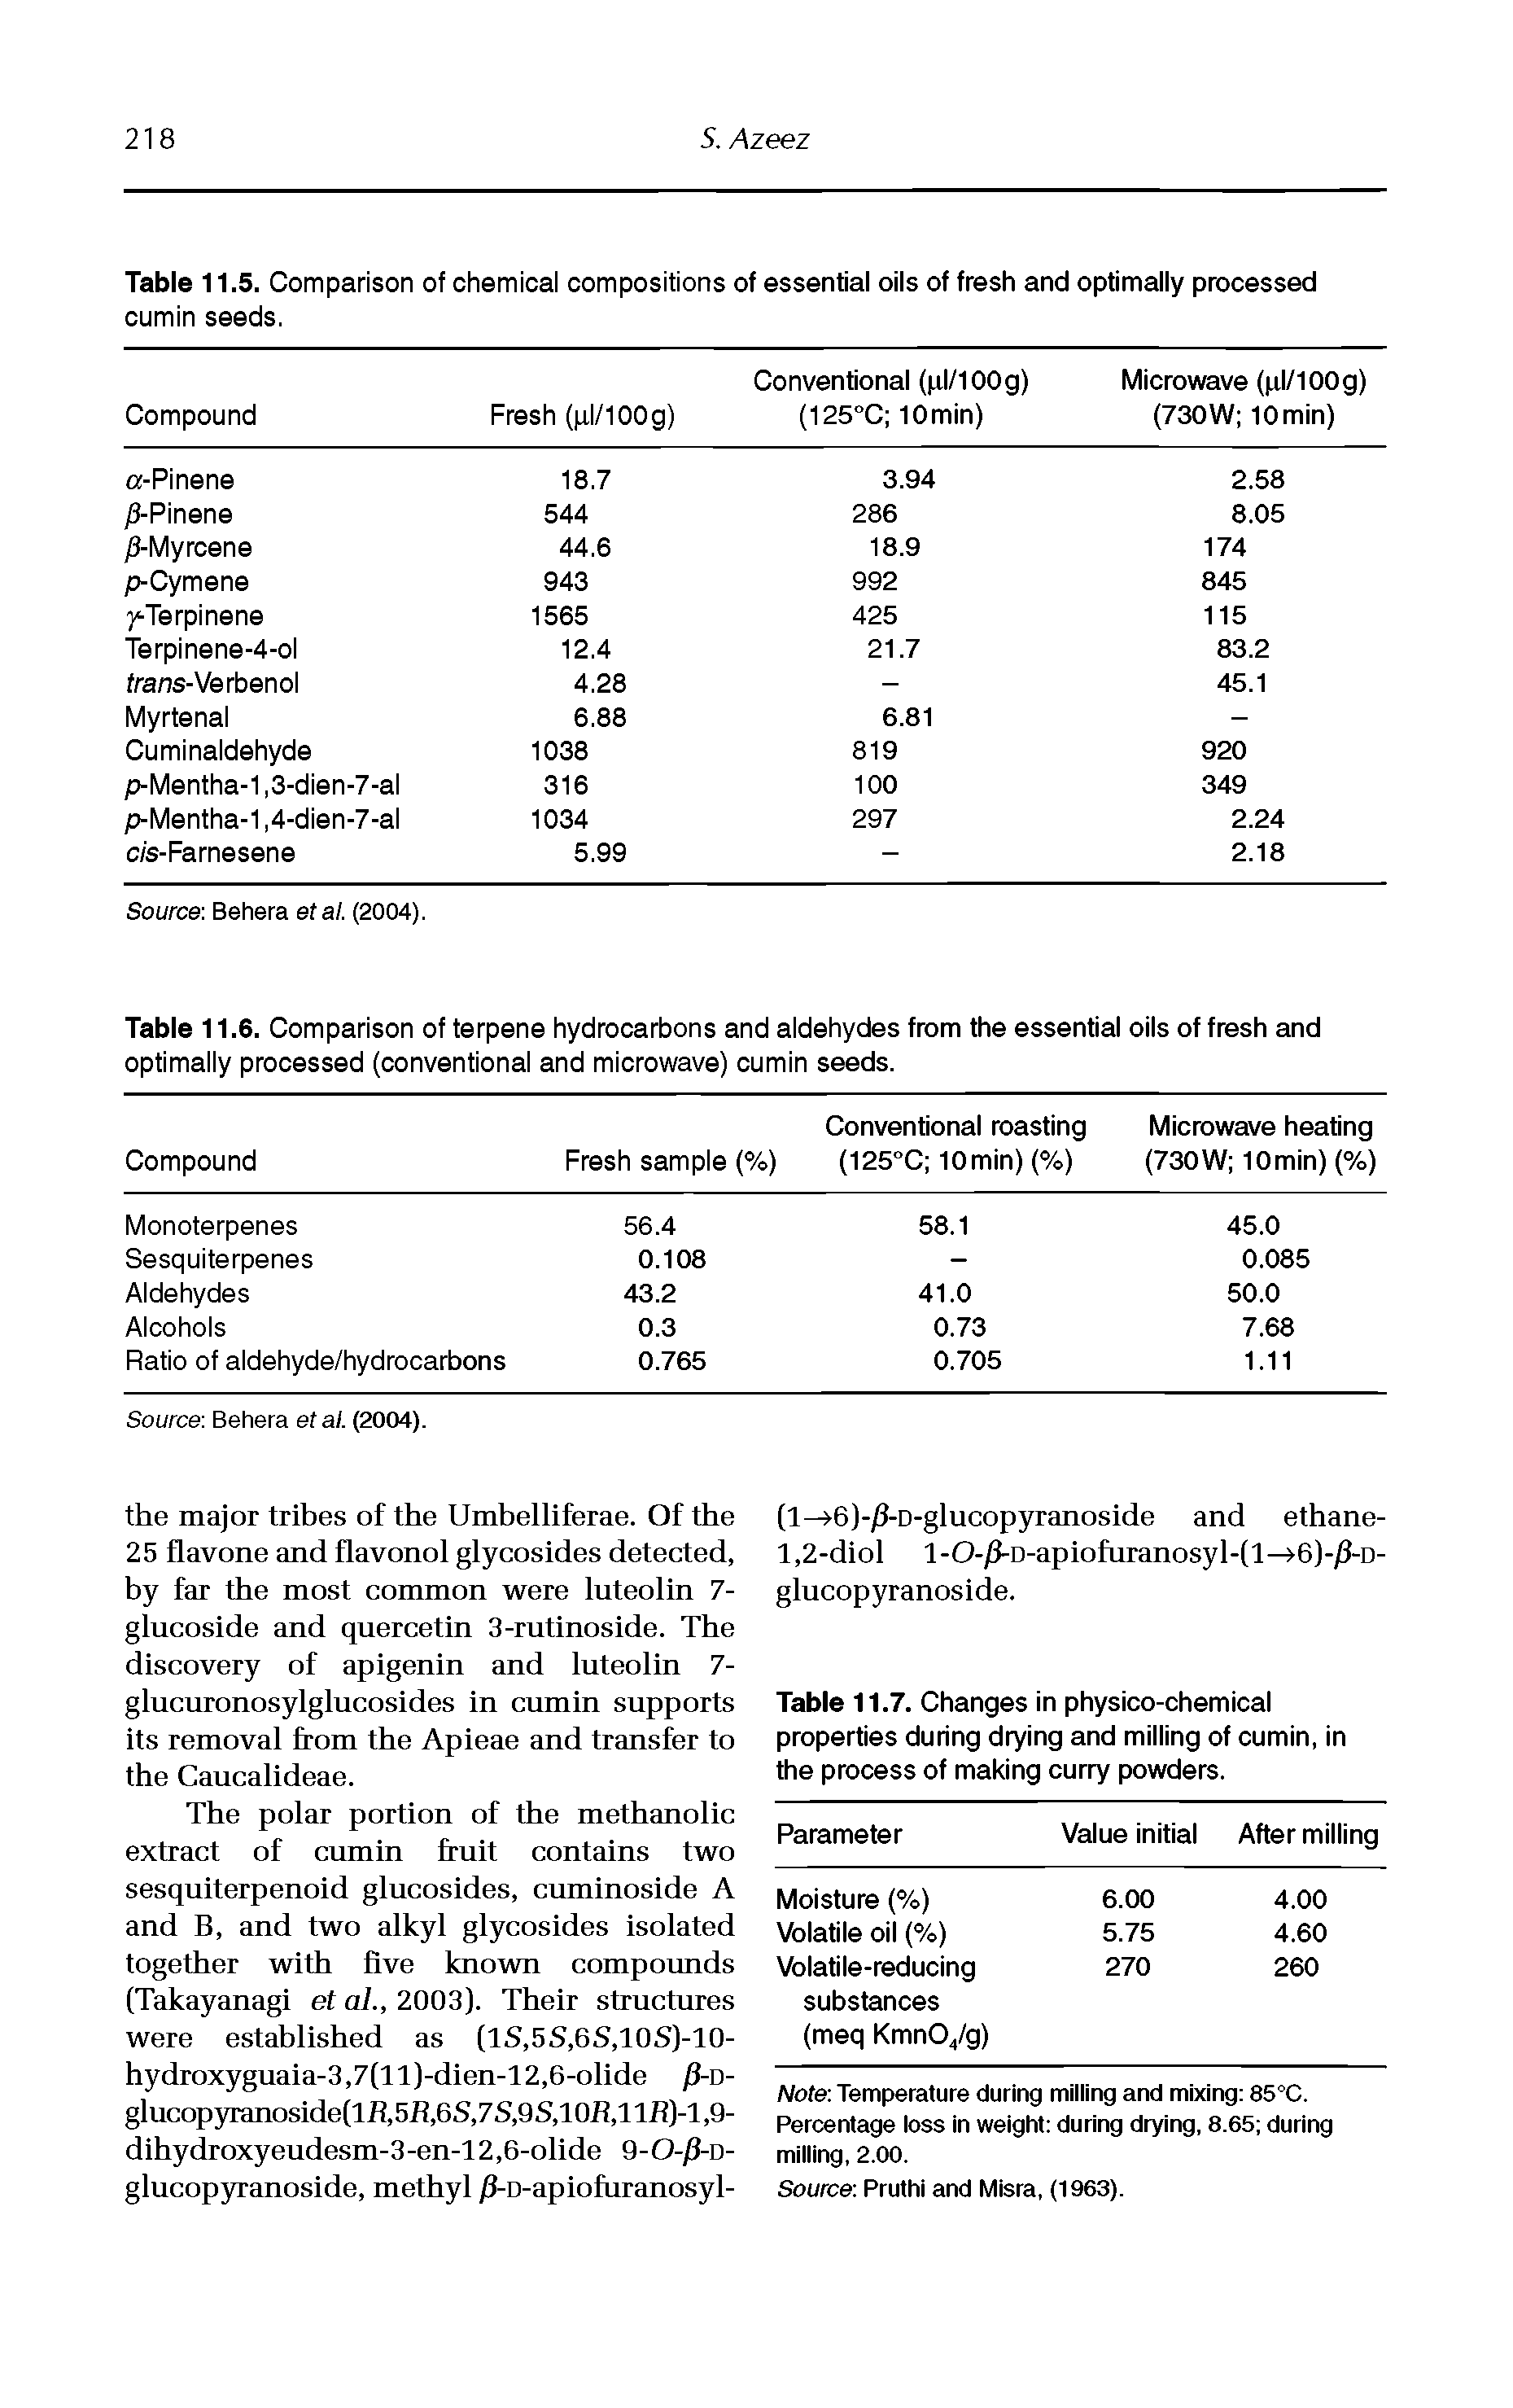 Table 11.7. Changes in physico-chemical properties during drying and milling of cumin, in the process of making curry powders.